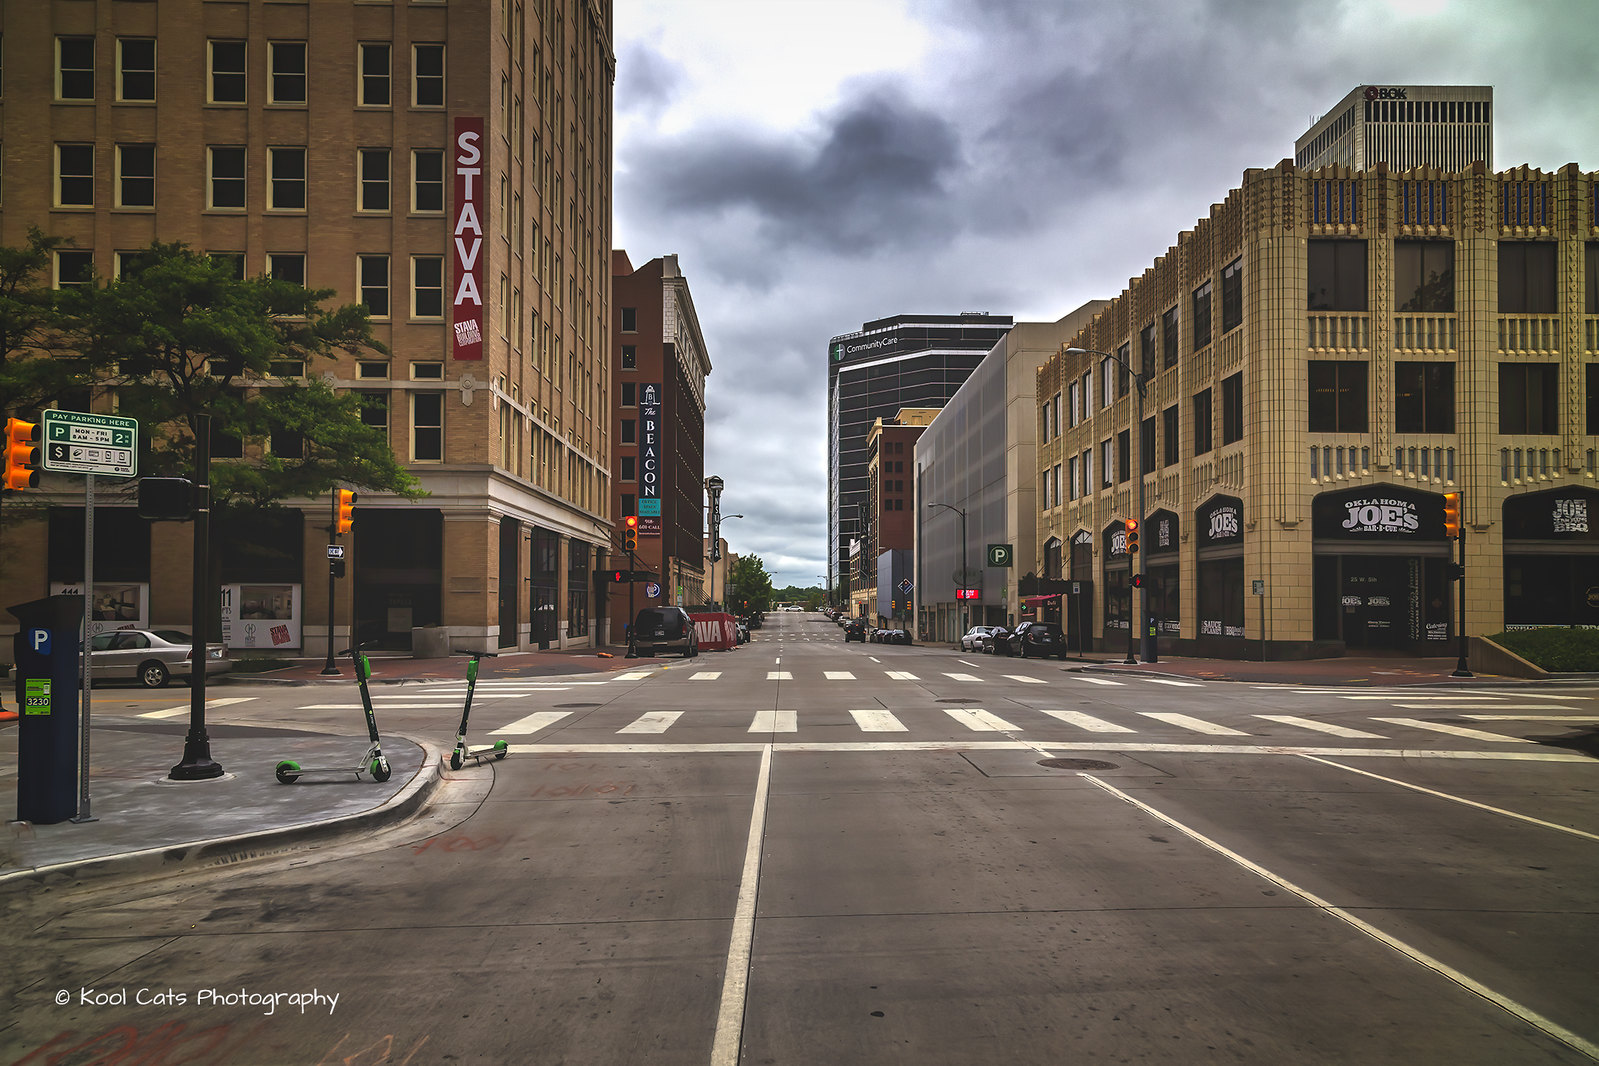 Streets of downtown Tulsa